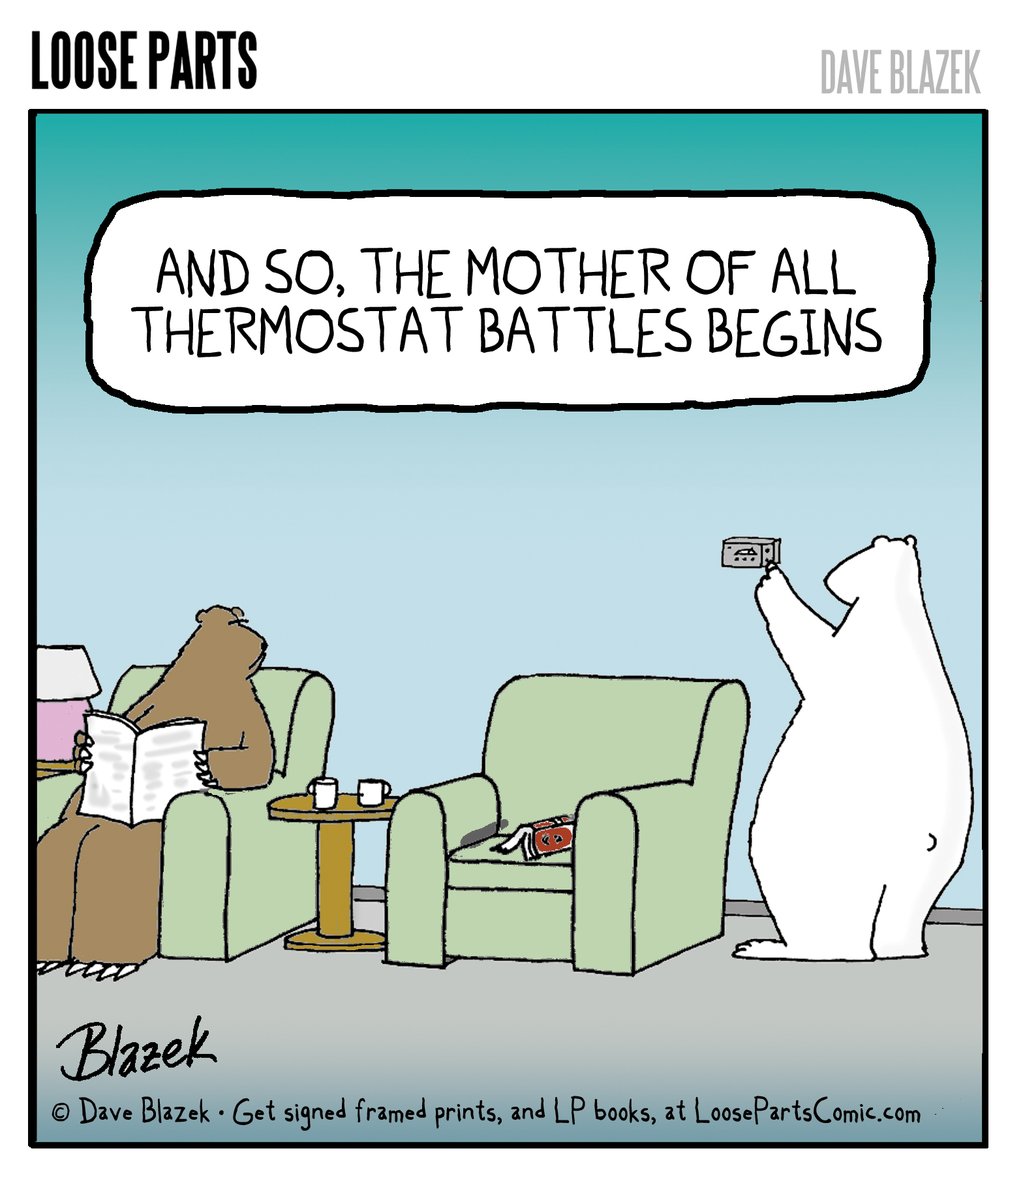 It's that time of year ... #Winter #Homeheating #Thermostats #Bears #Roommates